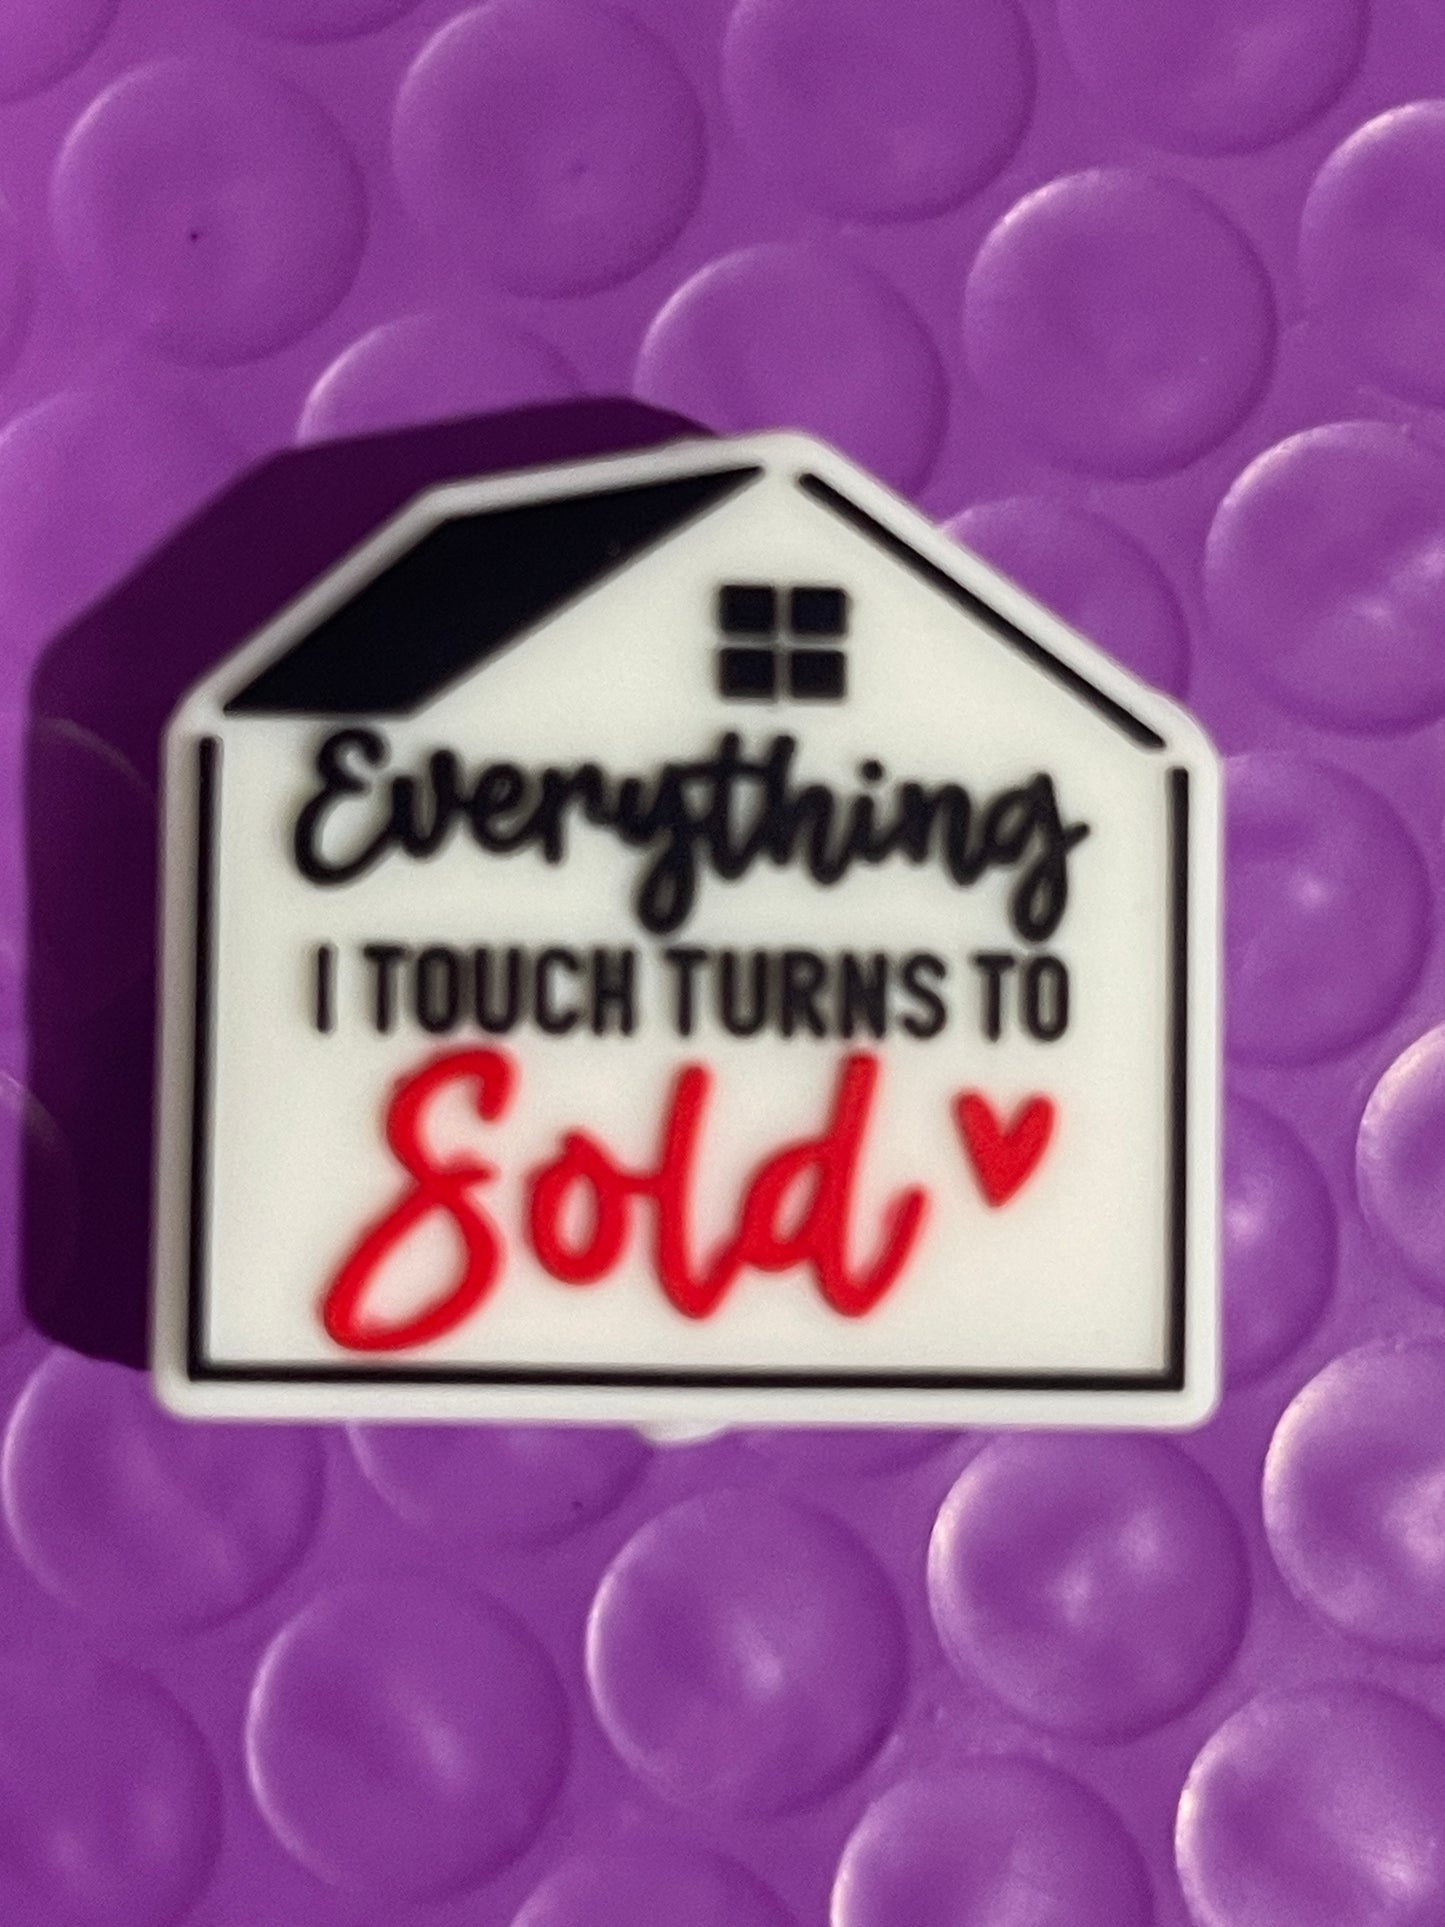 Everything I touch turns to sold